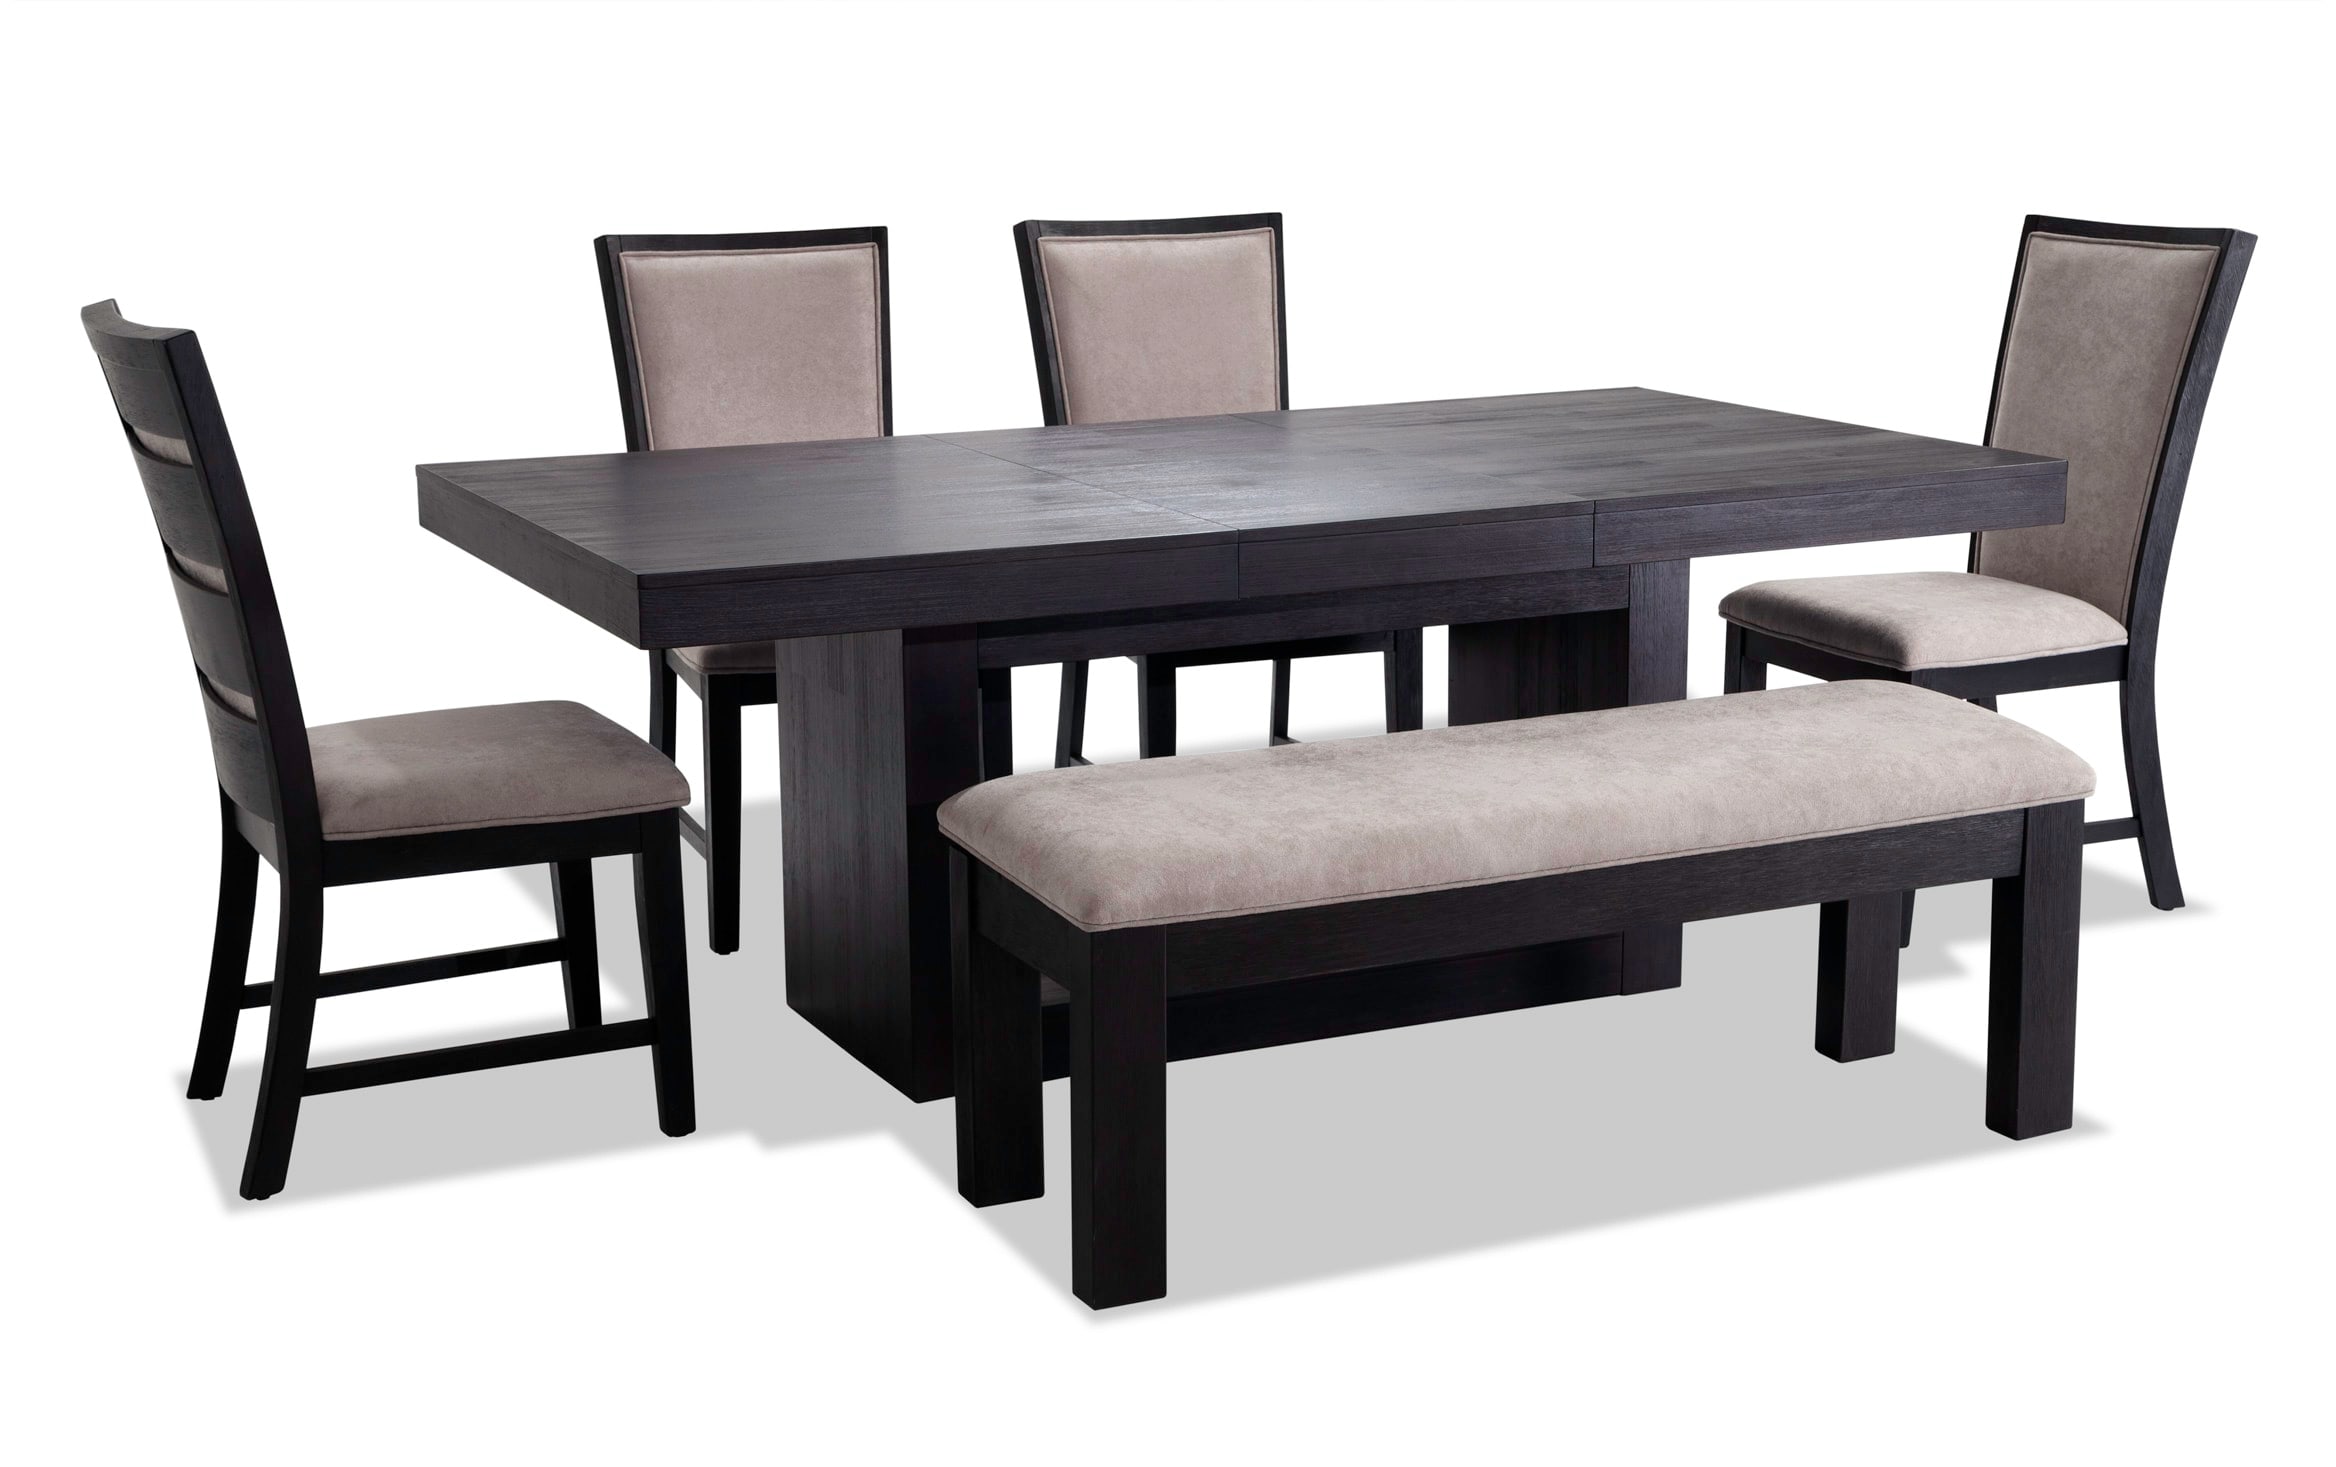 Cosmopolitan 6 Piece Dining Set With Bench Bob S Discount Furniture